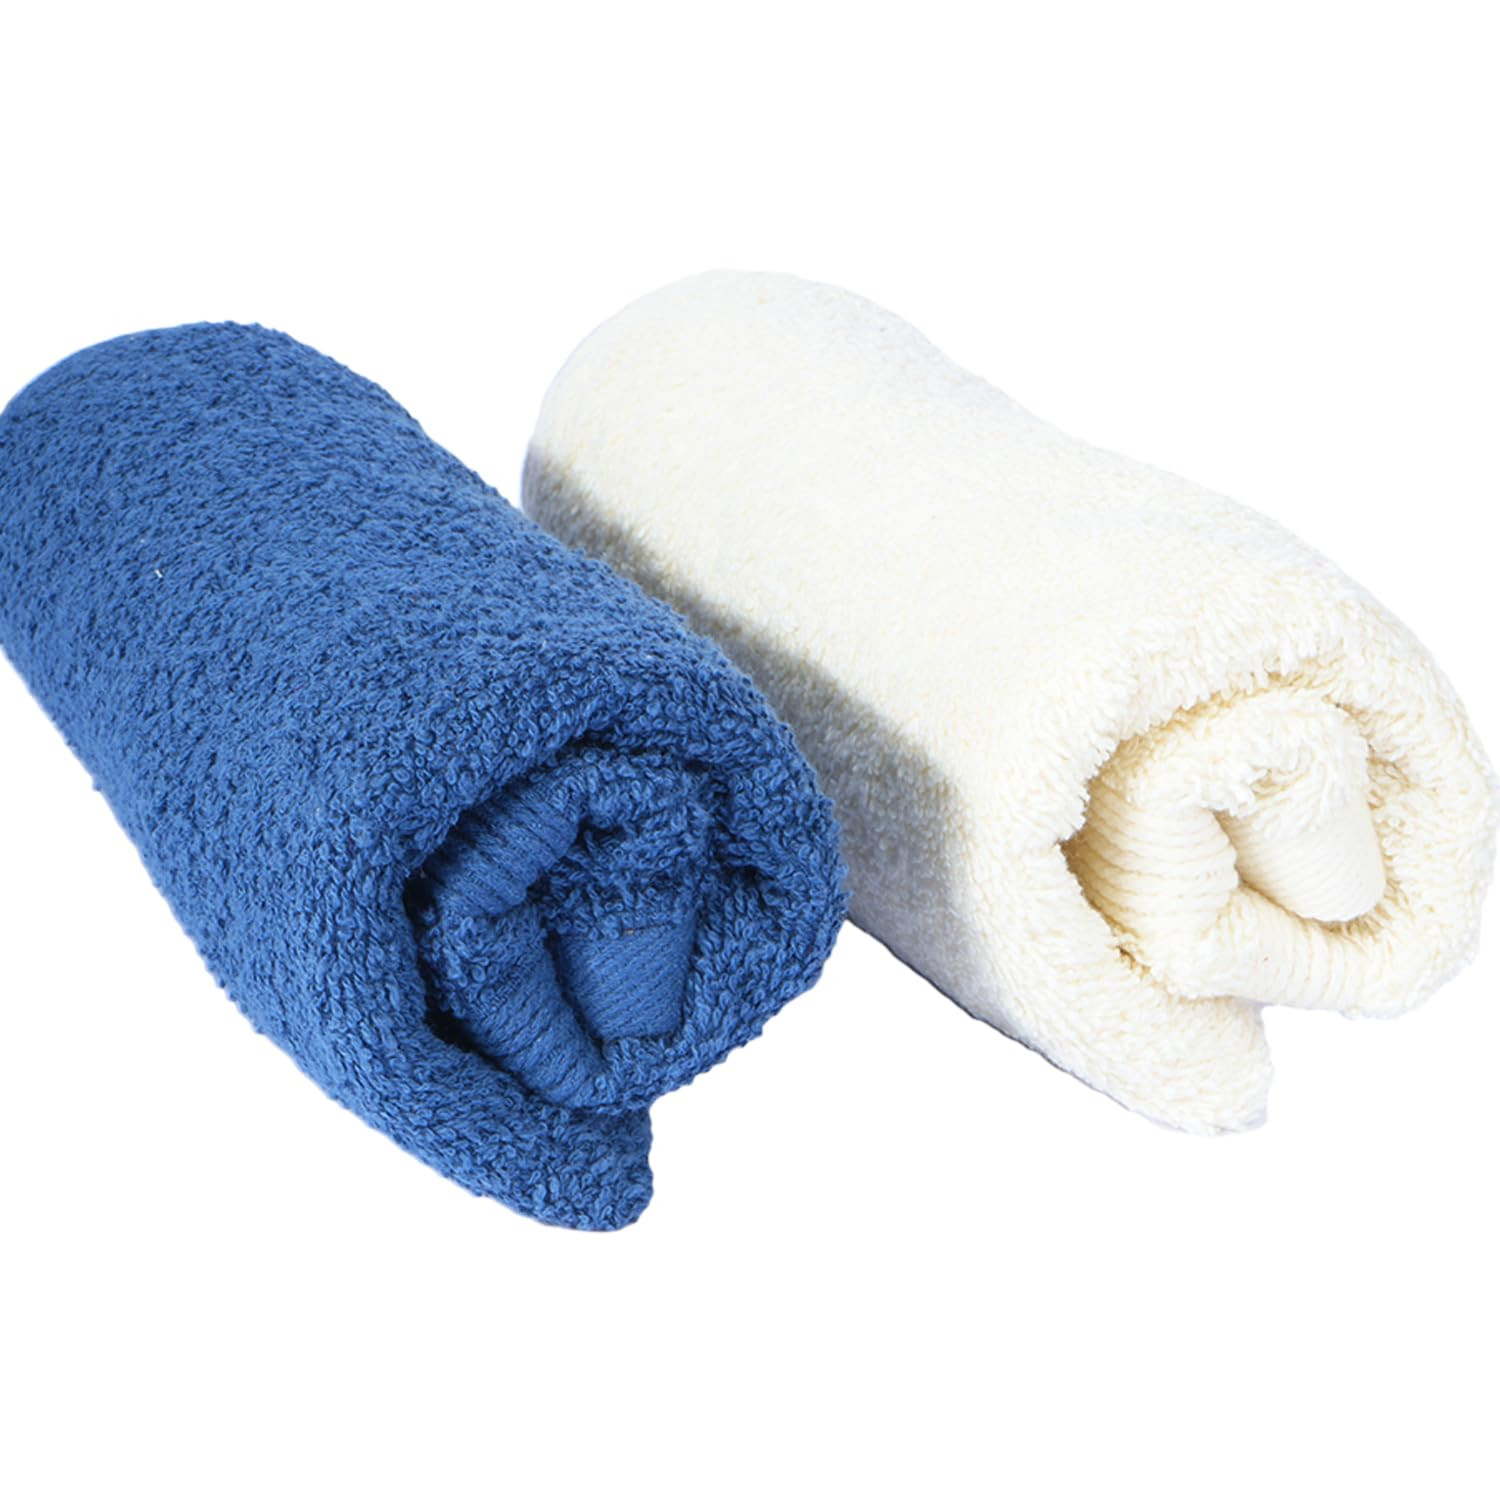 Kuber Industries 525 GSM Cotton Hand towels |Super Soft, Quick Absorbent & Anti-Bacterial|Gym & Workout Towels|Pack of 2 (Blue & Ivory)